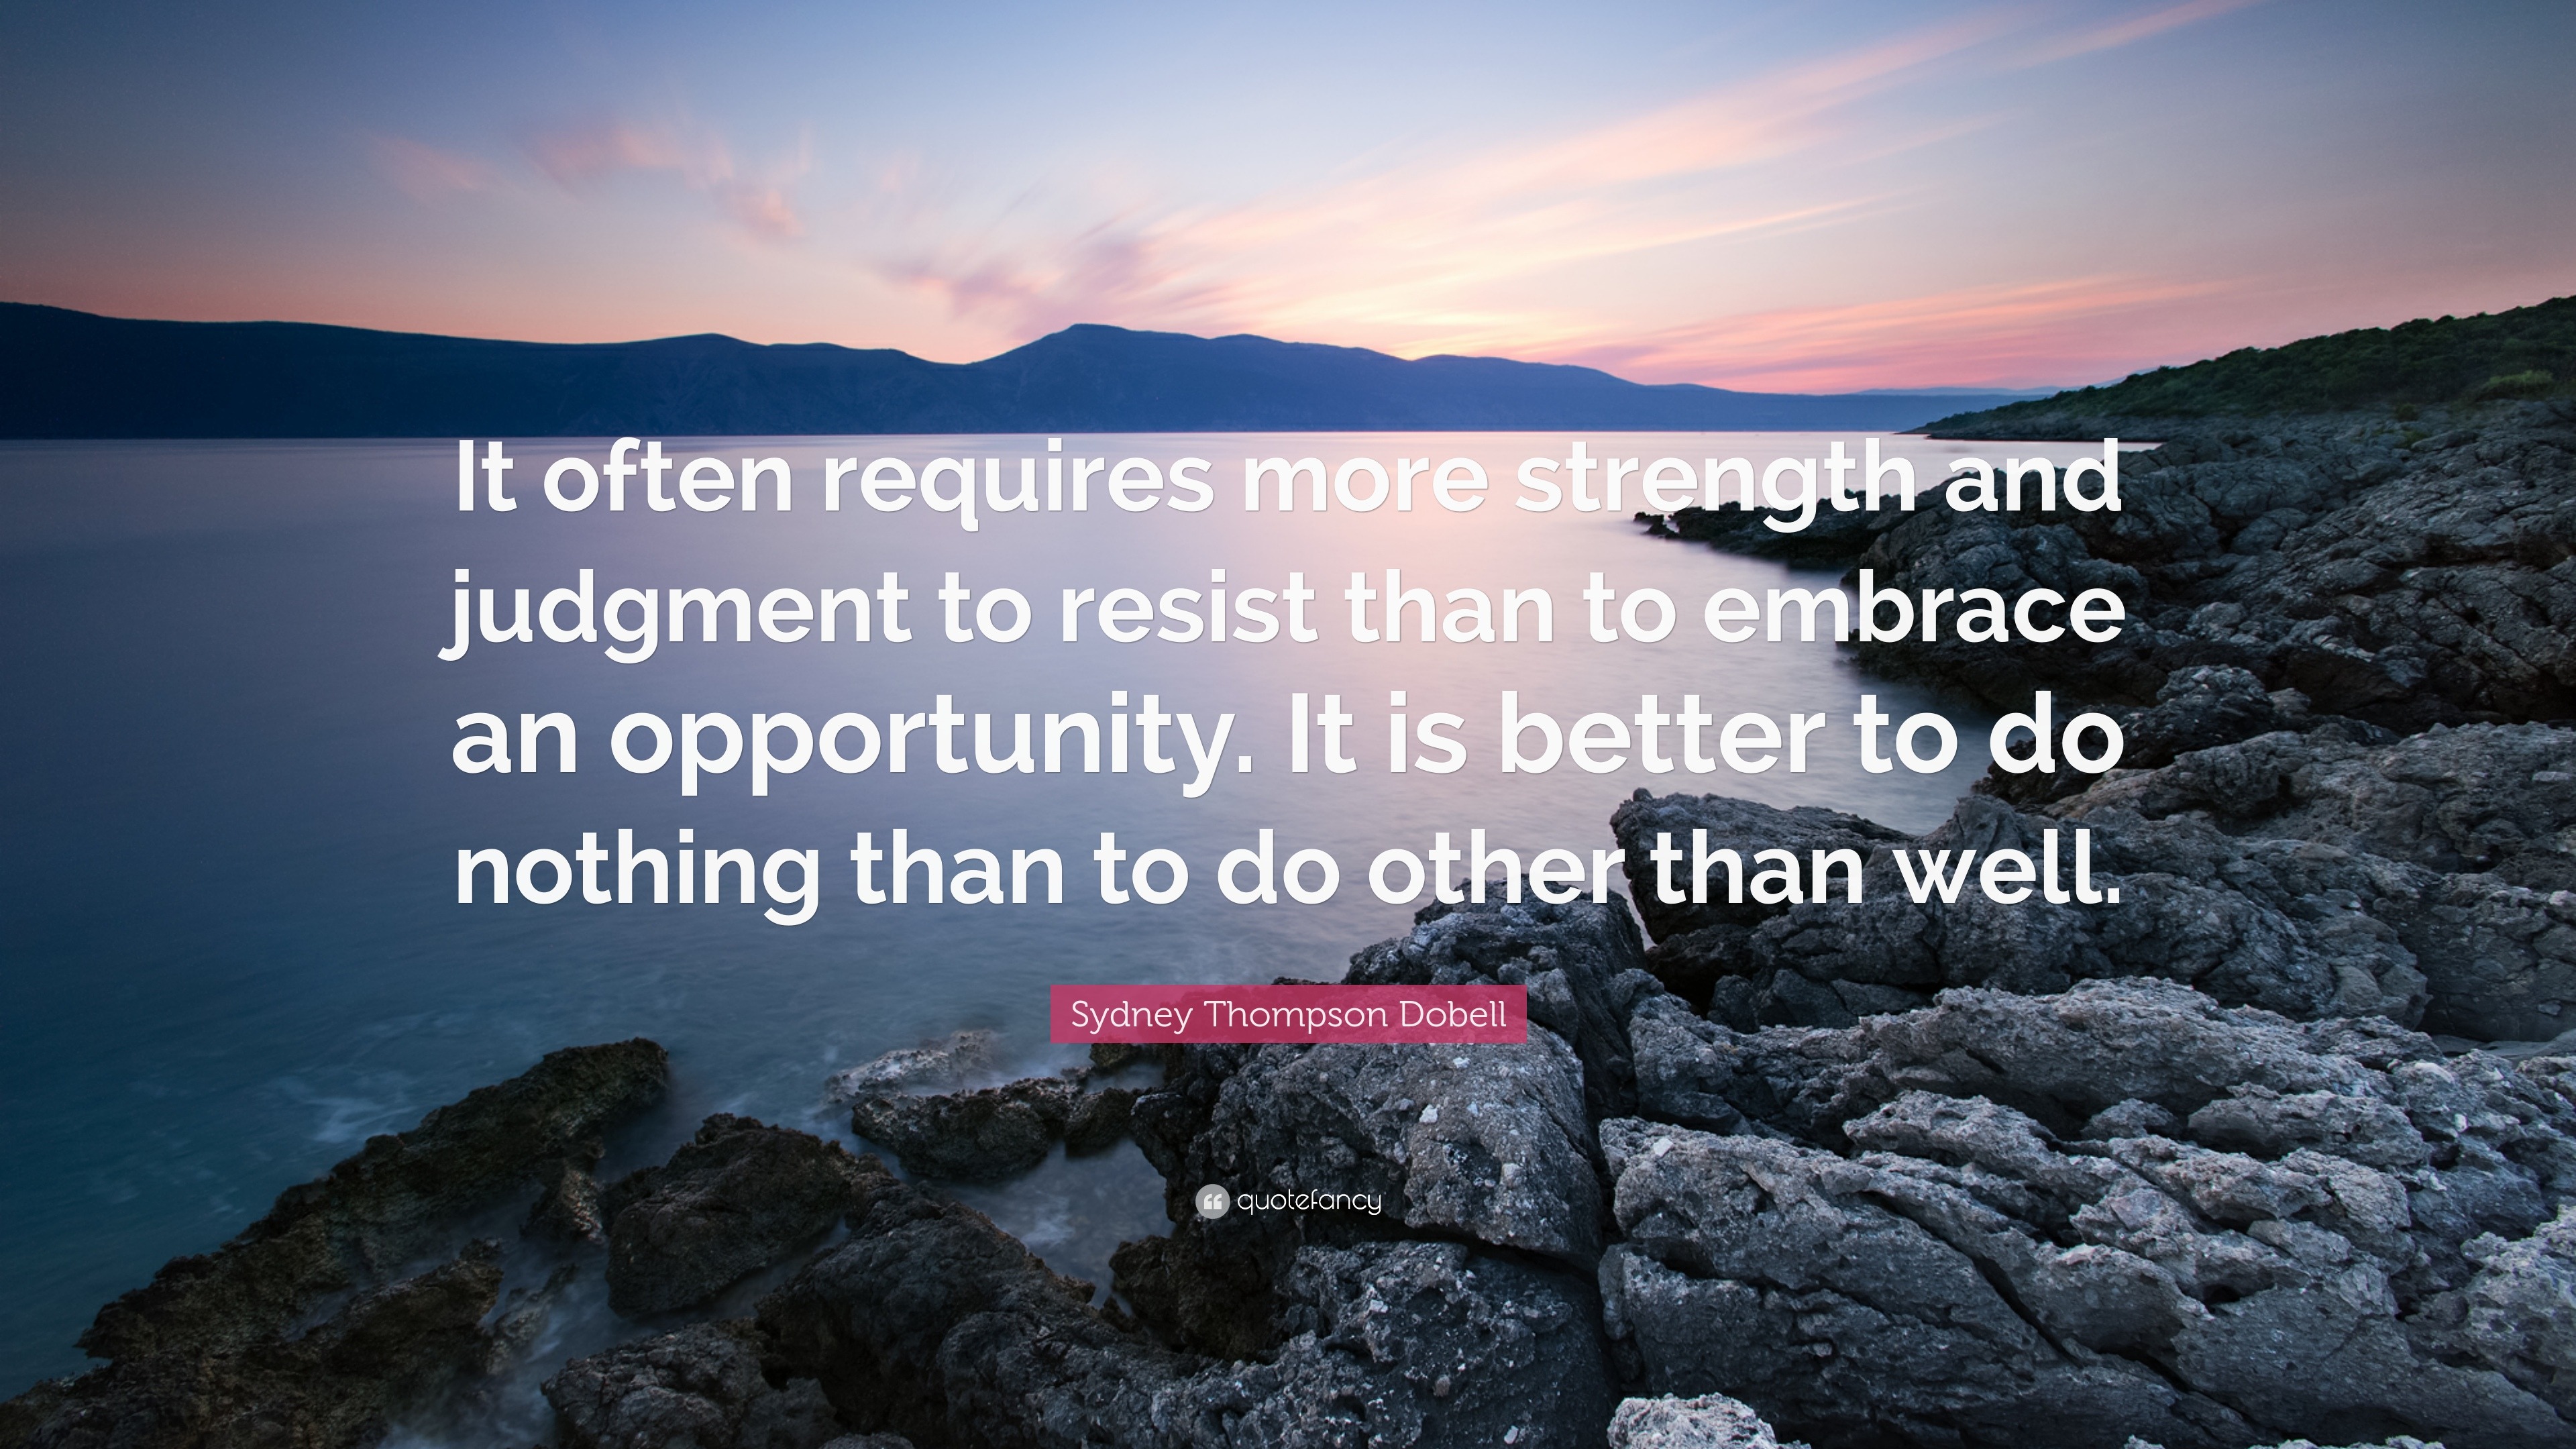 Sydney Thompson Dobell Quote: “It often requires more strength and ...